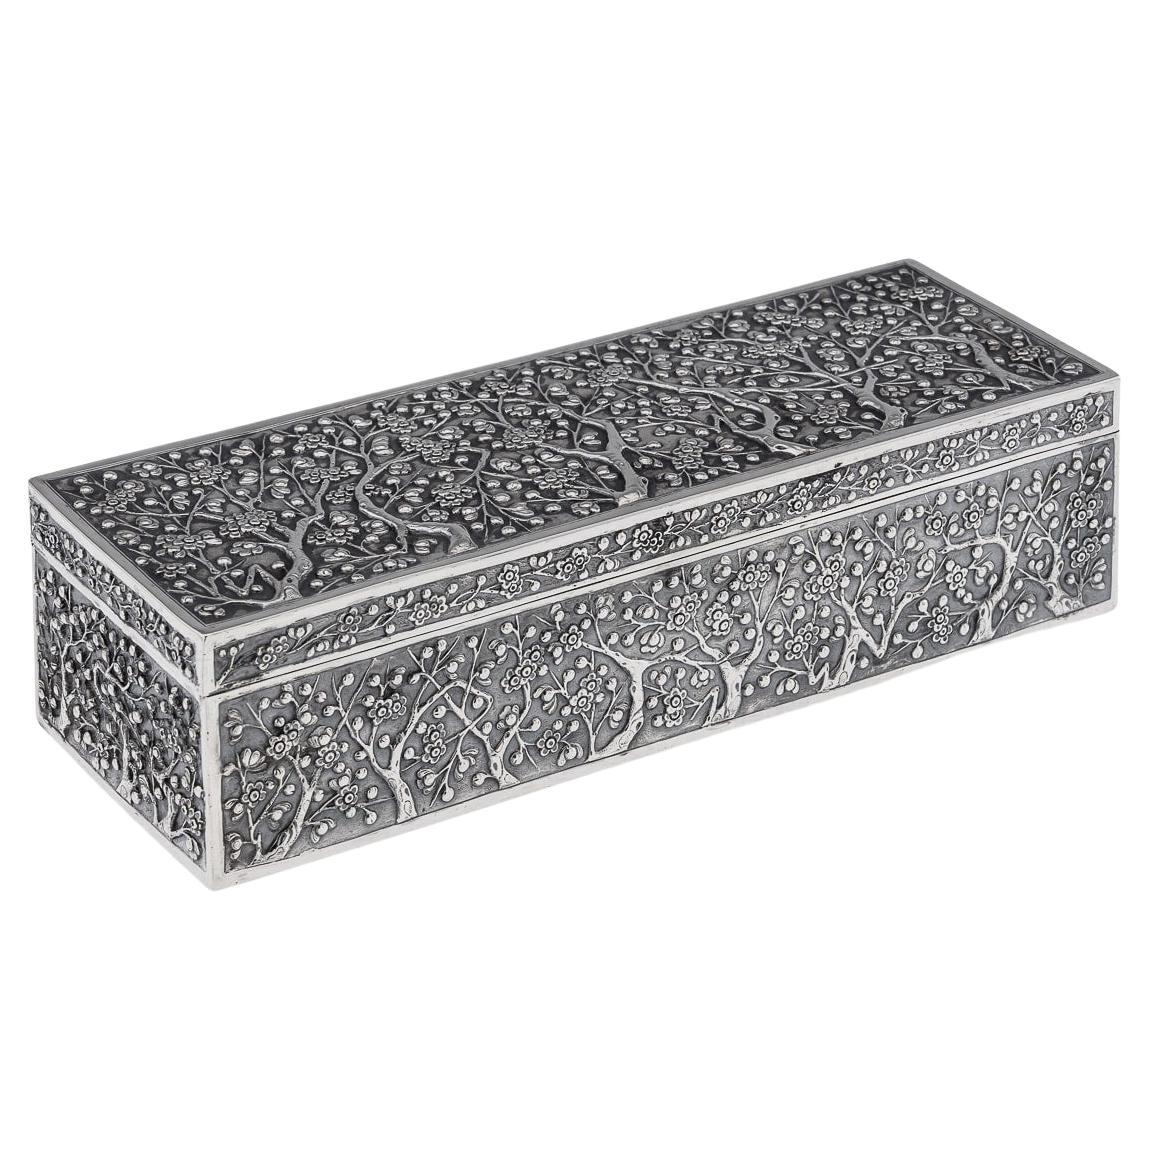 Antique 19th Century Chinese Silver Cherry Blossom Box, Wang Hing 1890